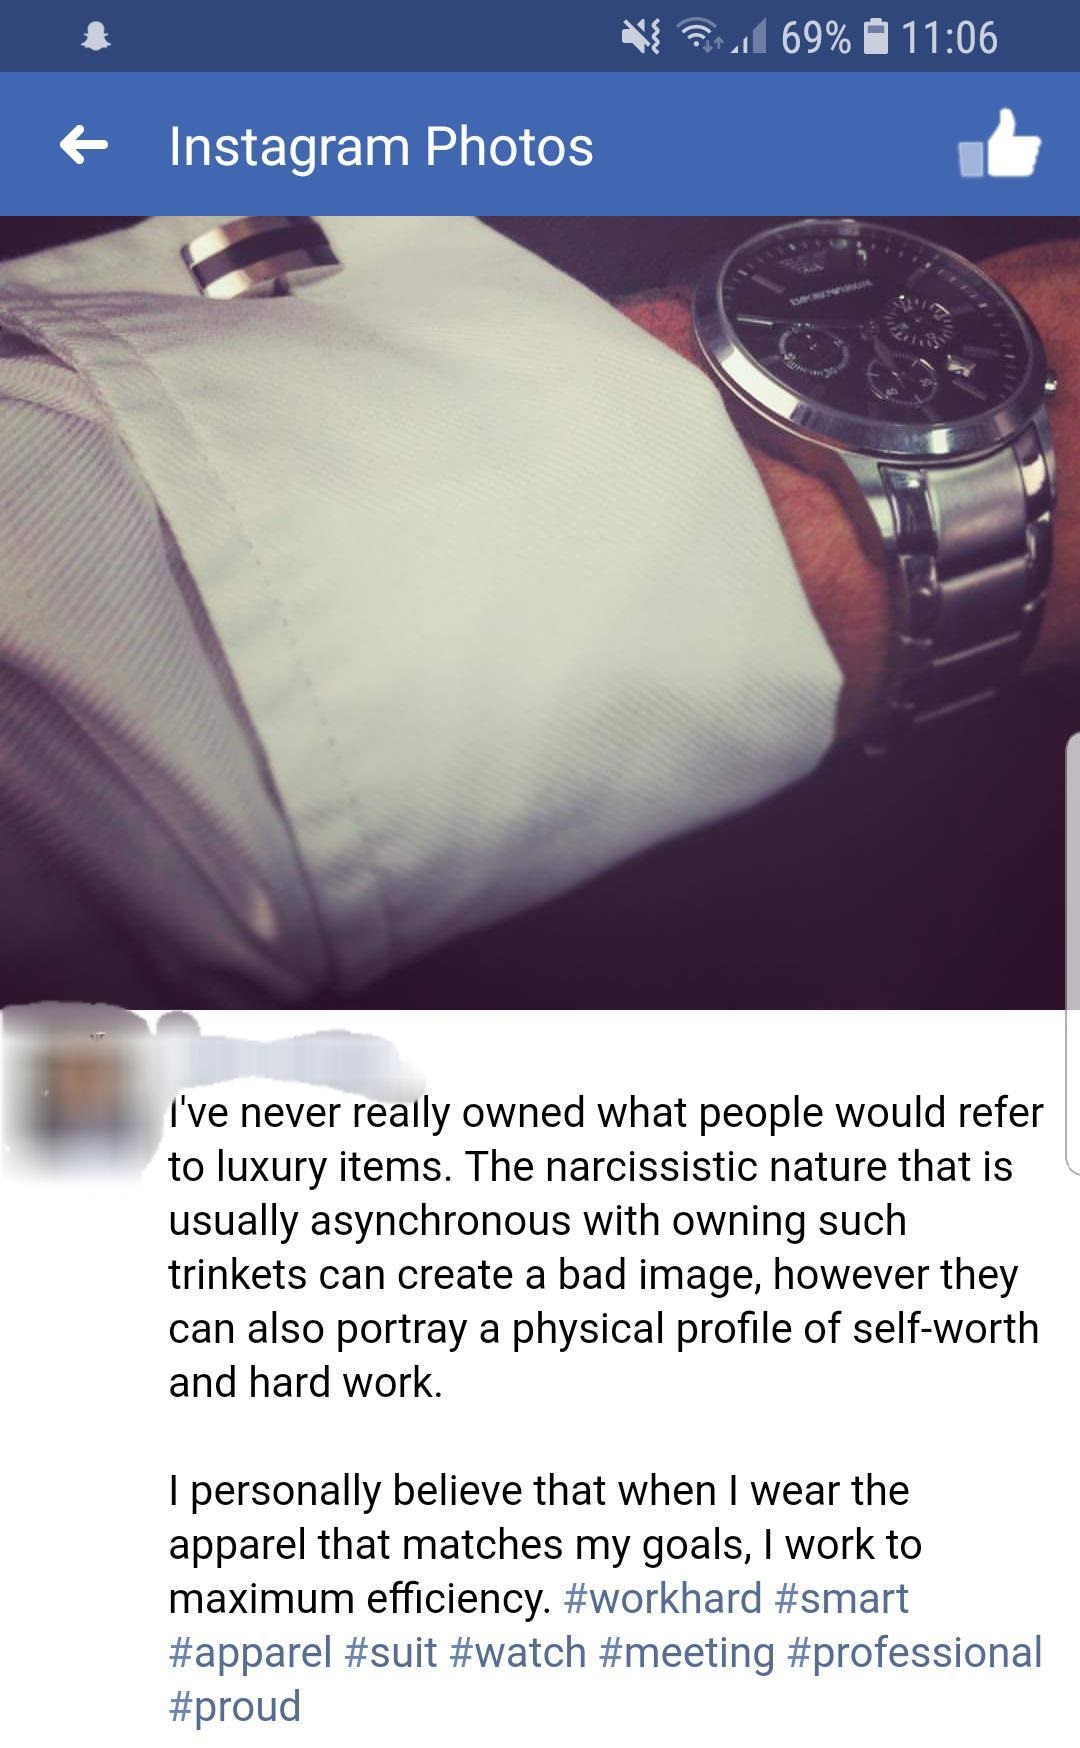 Ni Cr 69% 6 Instagram Photos I've never really owned what people would refer to luxury items. The narcissistic nature that is usually asynchronous with owning such trinkets can create a bad image, however they can also portray a physical profile of…